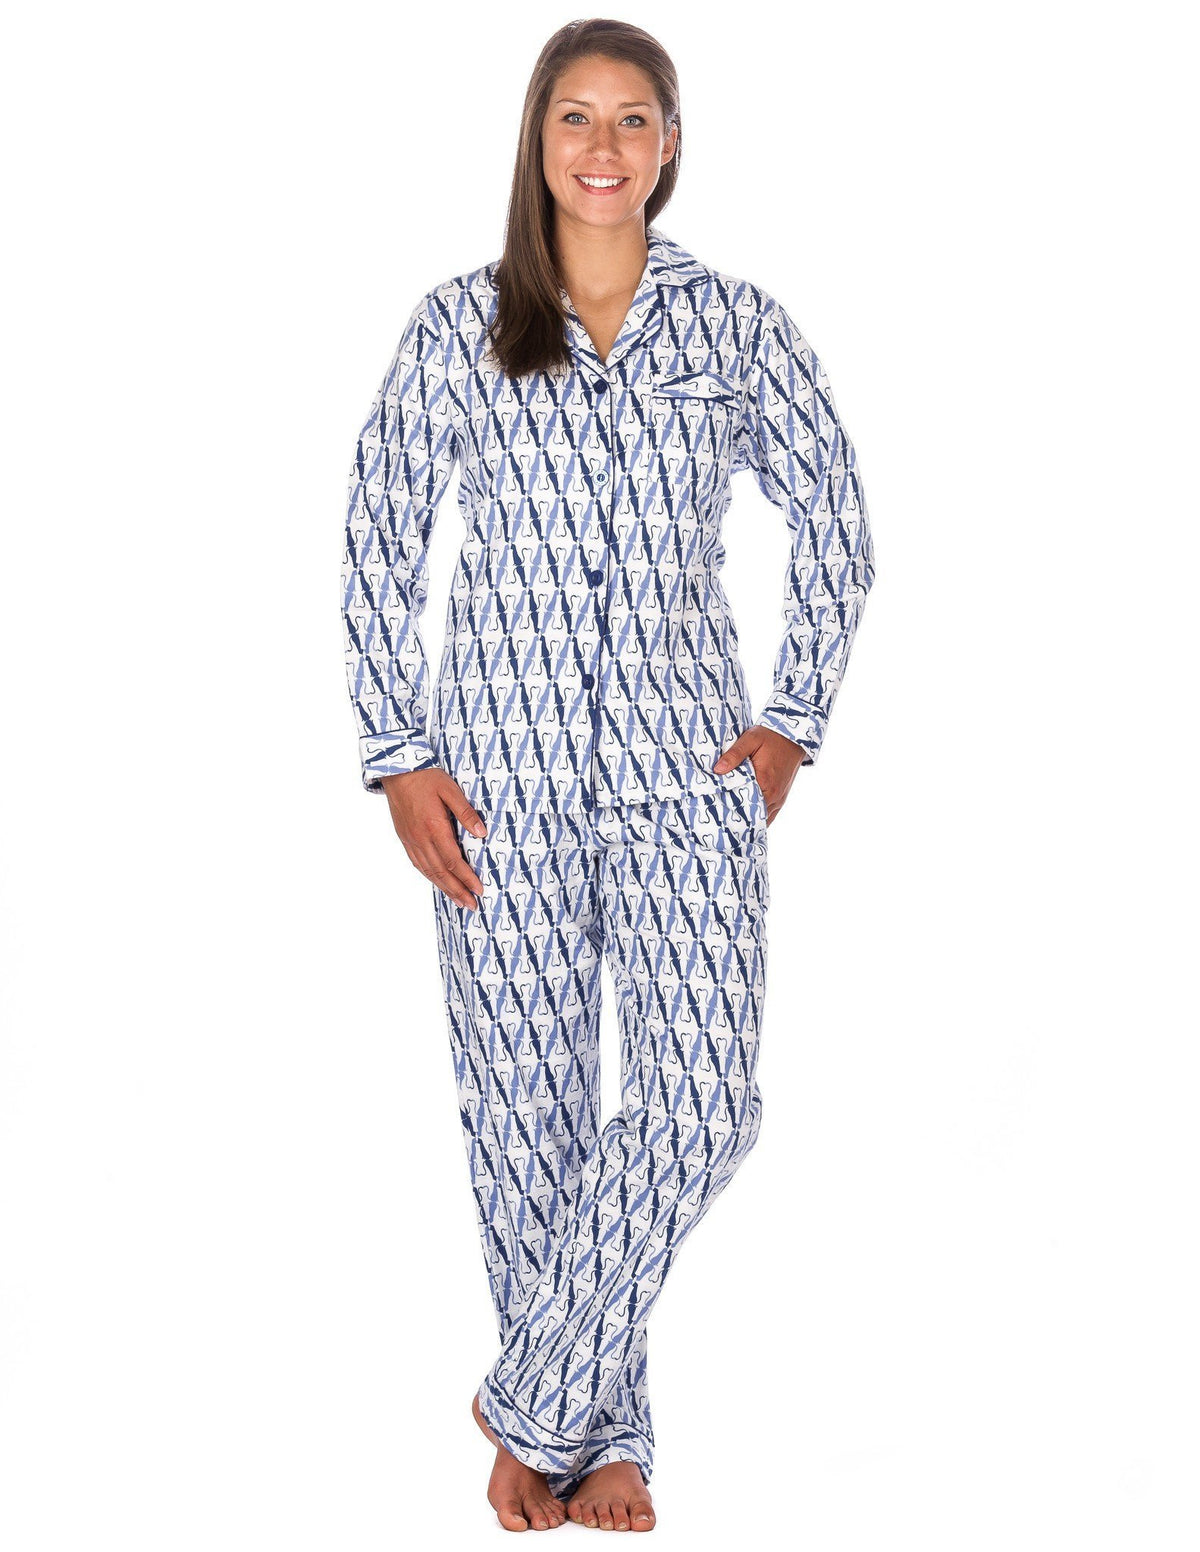 Women's Premium 100% Cotton Flannel Pajama Sleepwear Set (Relaxed Fit) - Its A Cats World - White/Blue